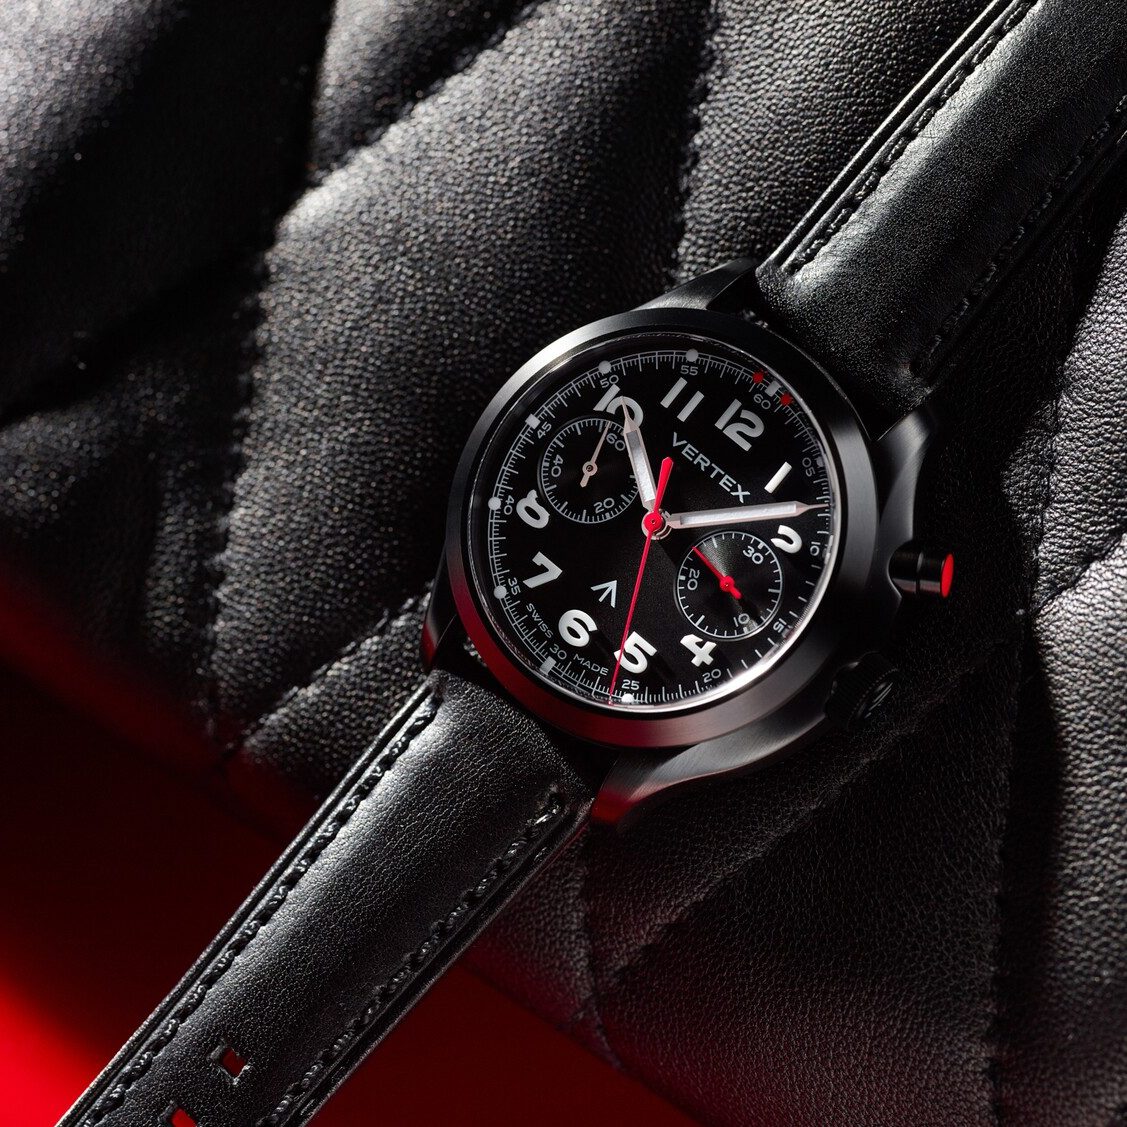 Caterham is celebrating its 50th anniversary with this limited edition  watch | Top Gear